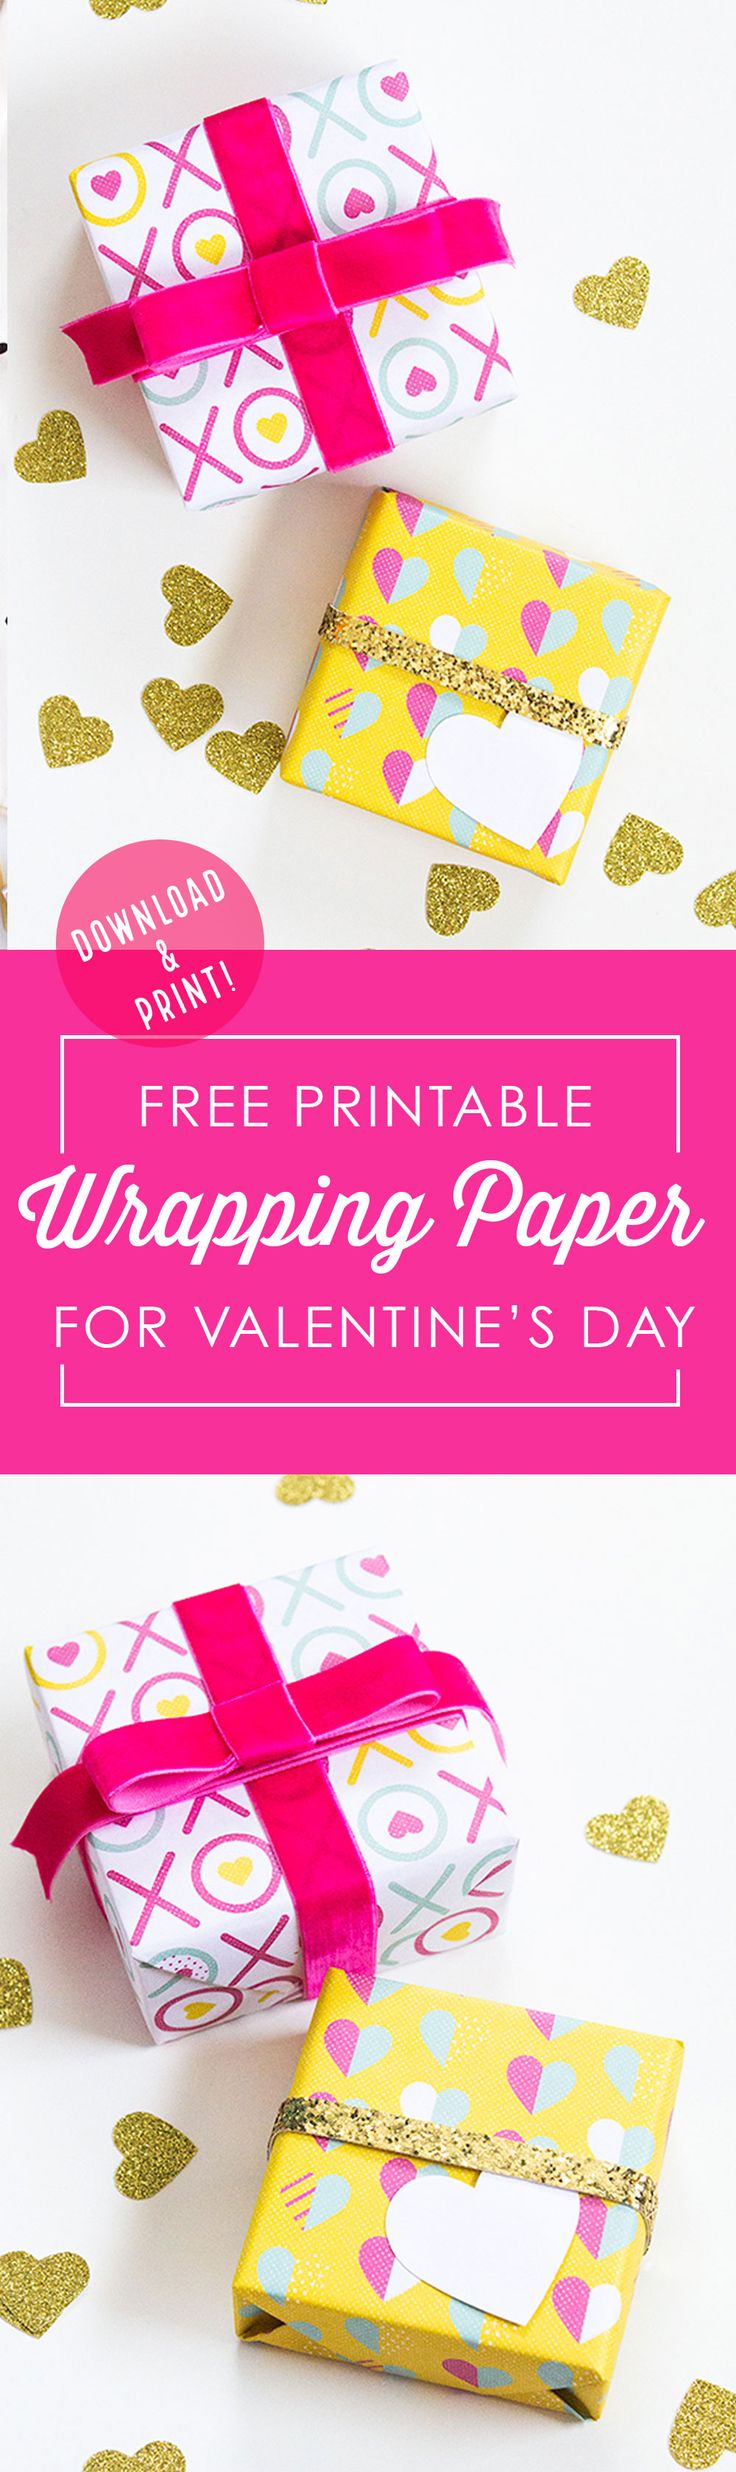 Download and print some custom wrapping paper for Valentine's Day. Free prin...